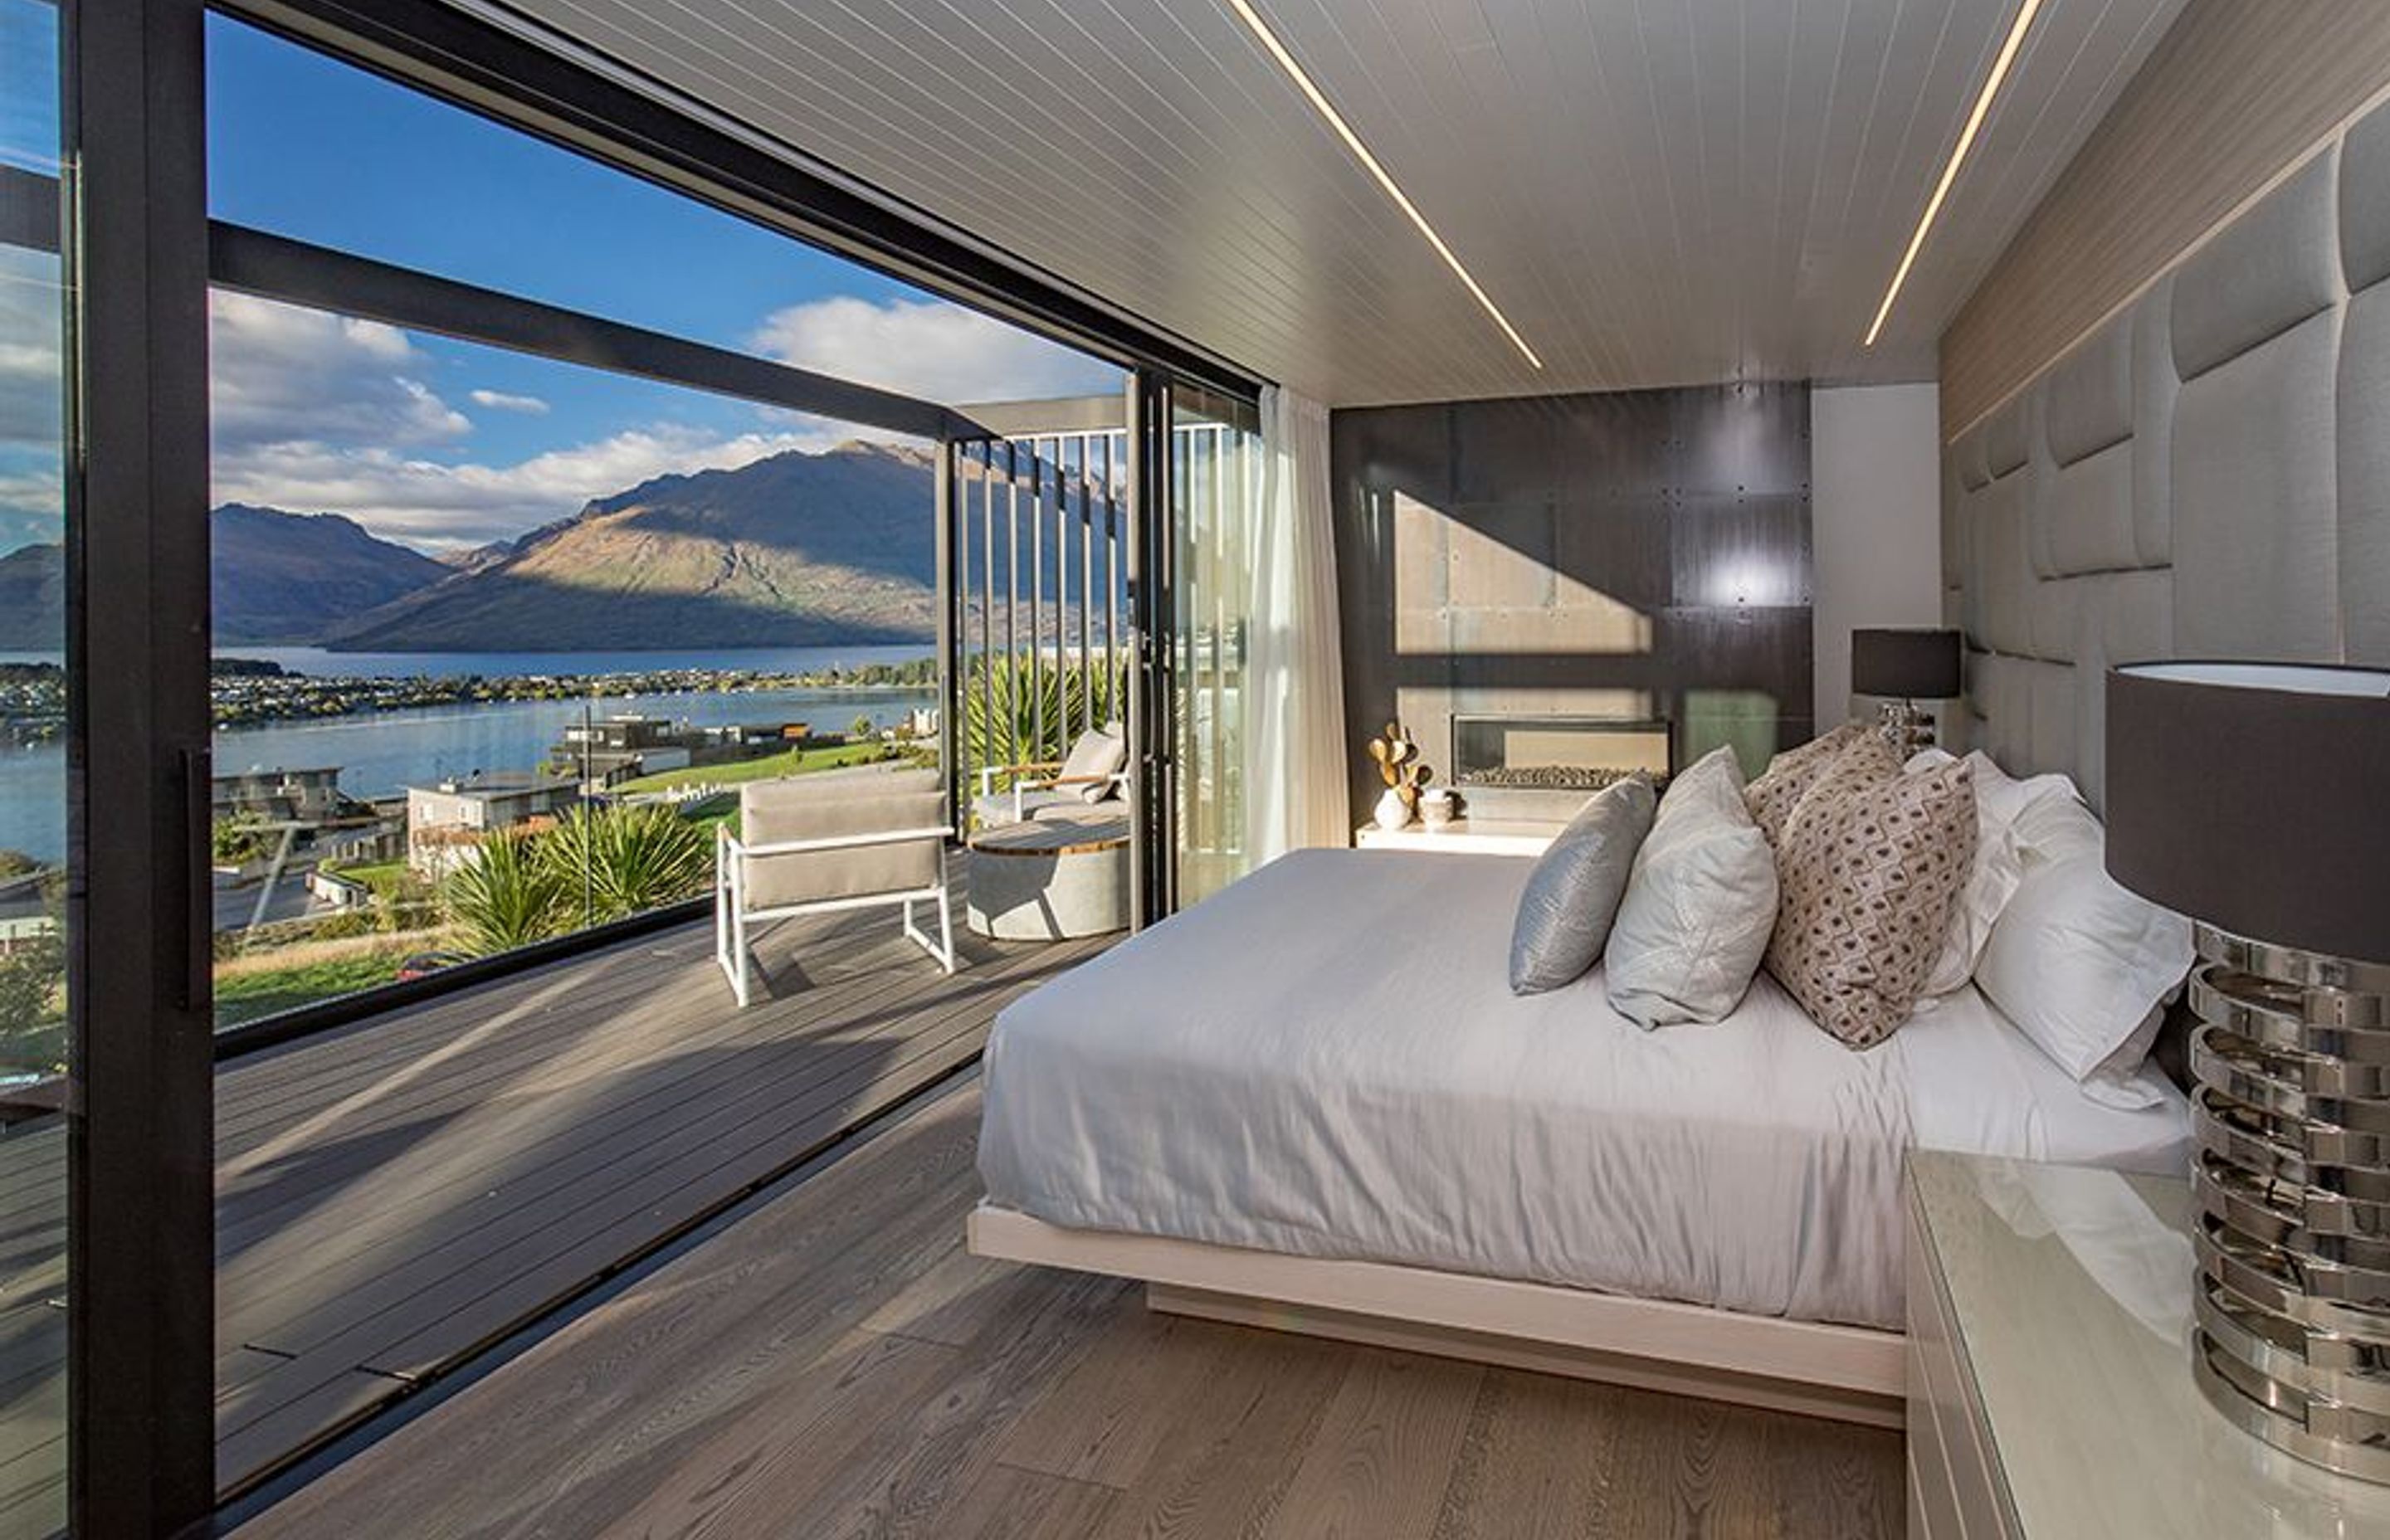 The bedroom has its own private deck area overlooking the lake and mountains, and a locally sourced gas fireplace that creates a cosy atmosphere during cooler weather.